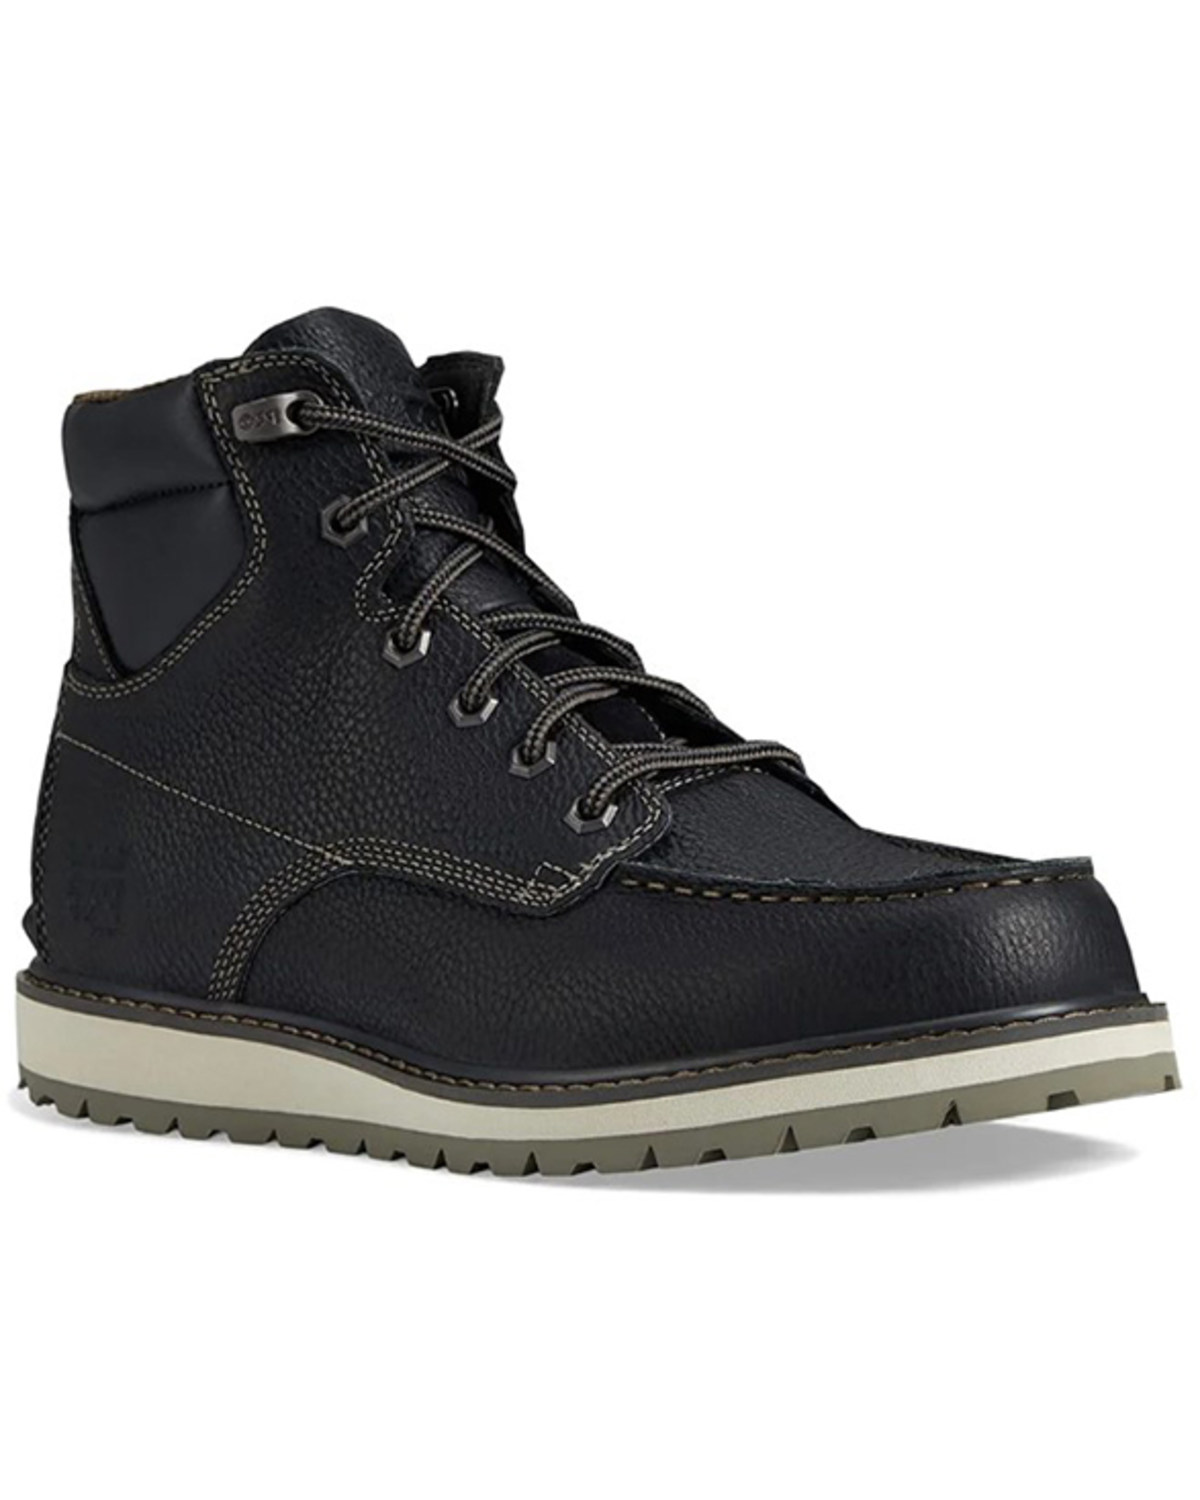 Timberland Men's 6" Irvine Lace-Up Work Boots - Moc Toe